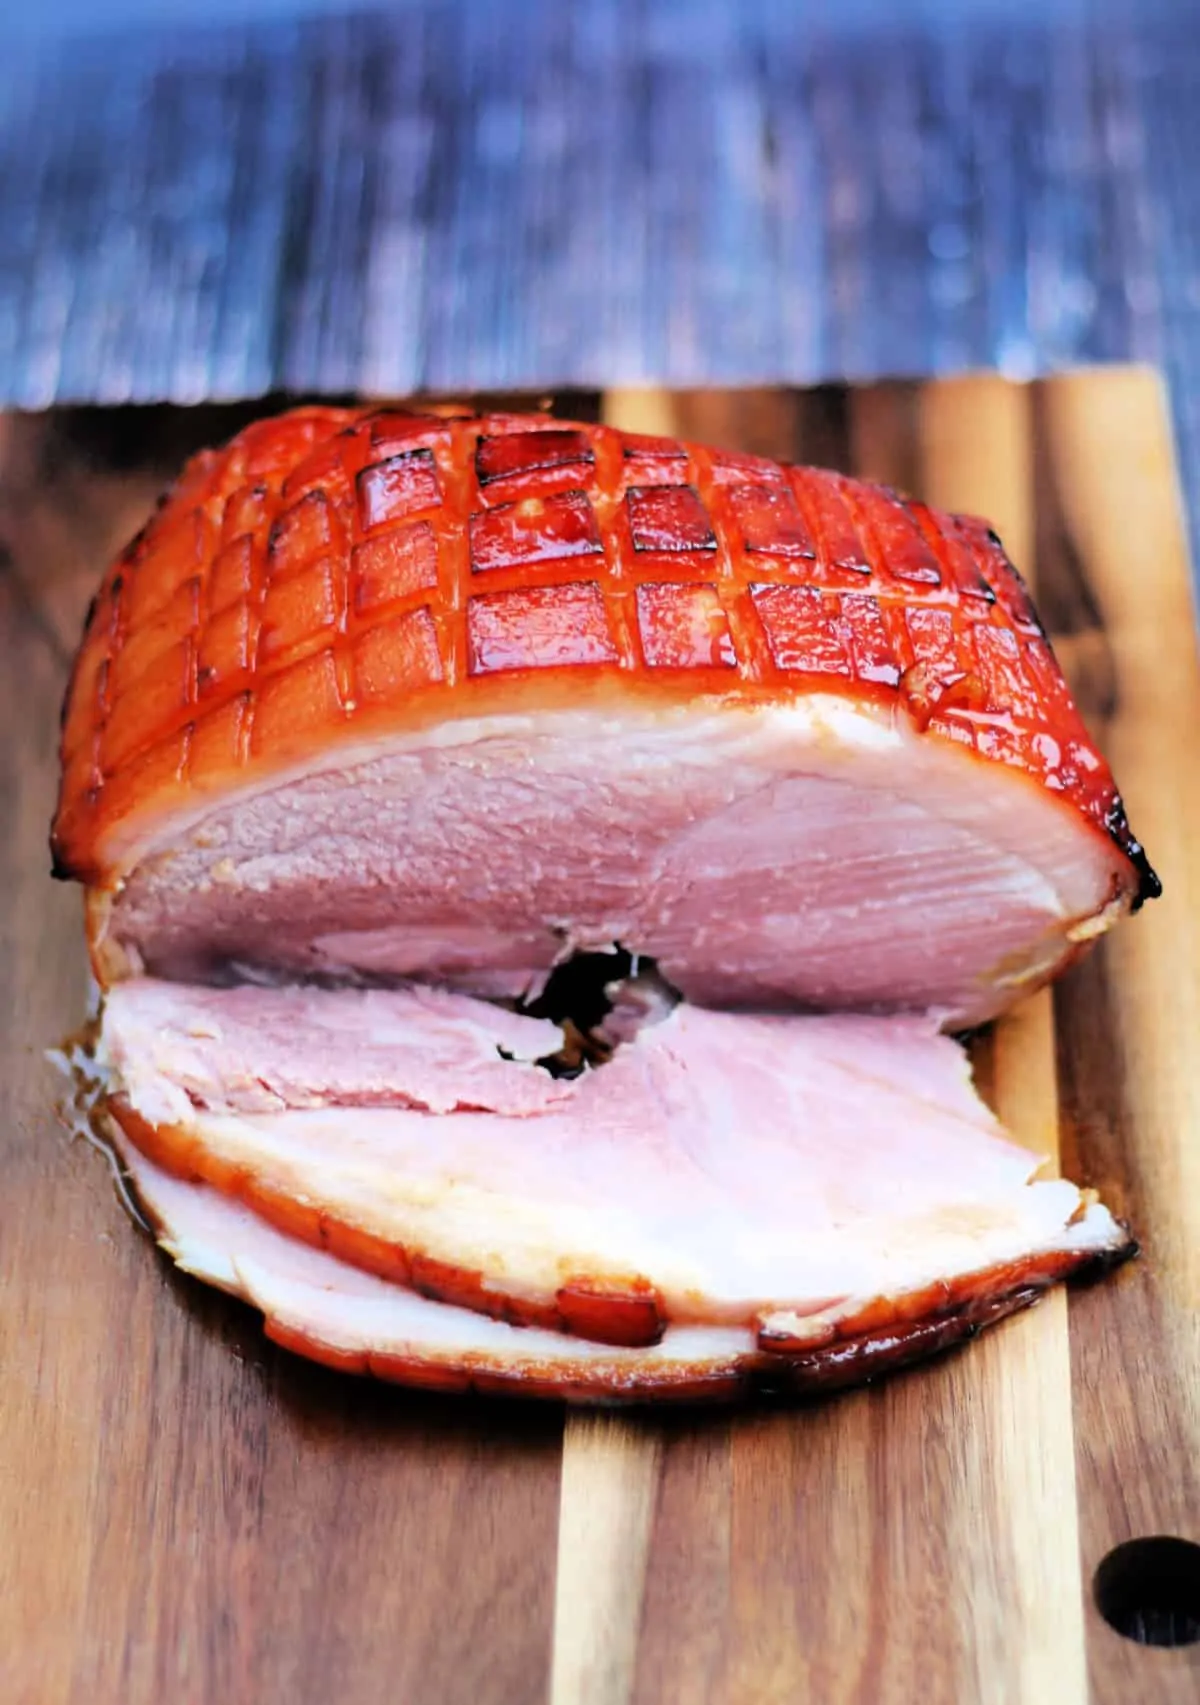 Sliced ham joint on a wooden board.